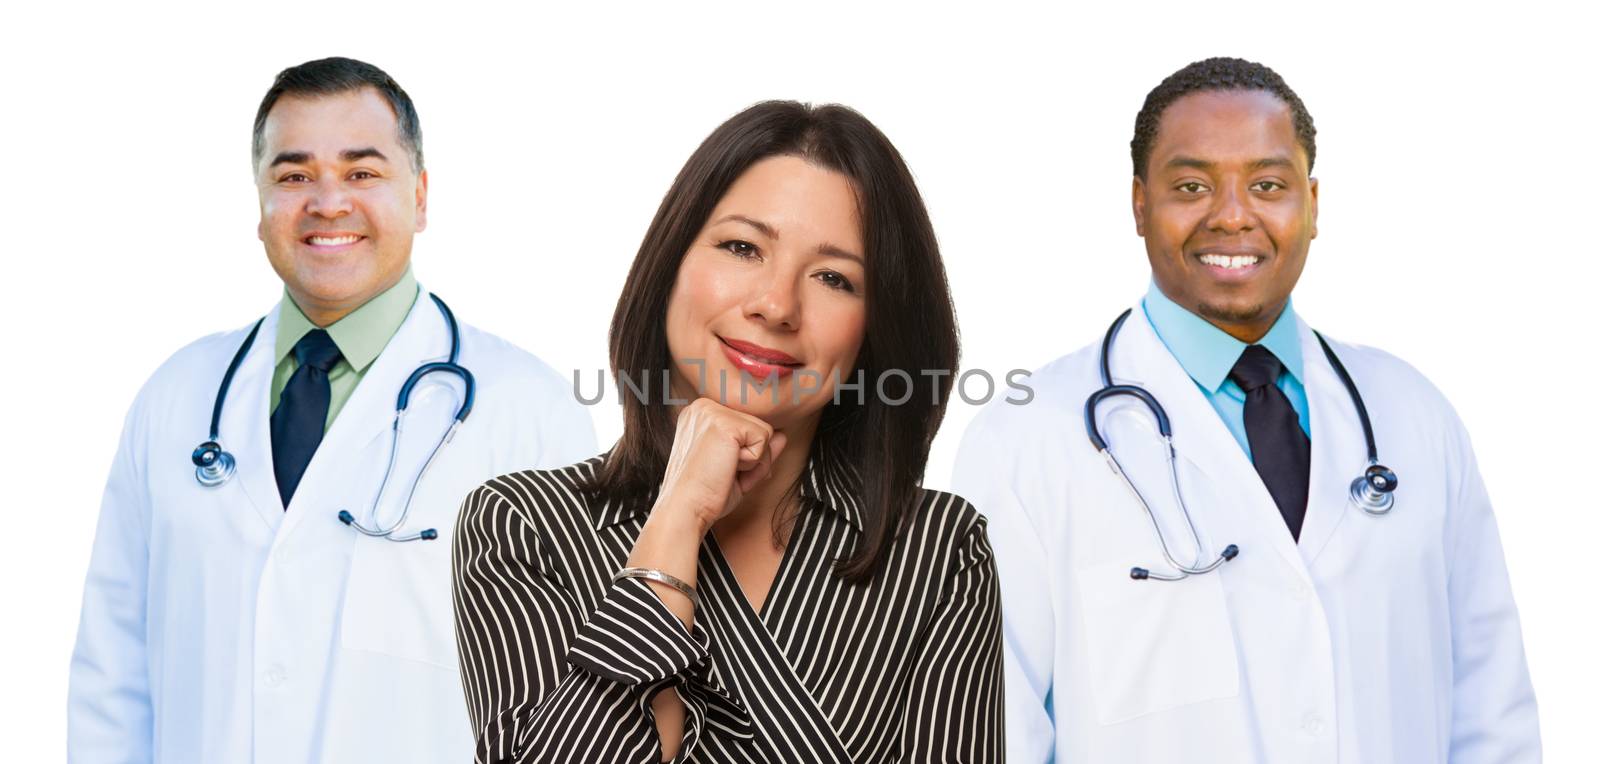 Two Mixed Race Doctors Behind Hispanic Woman on White by Feverpitched